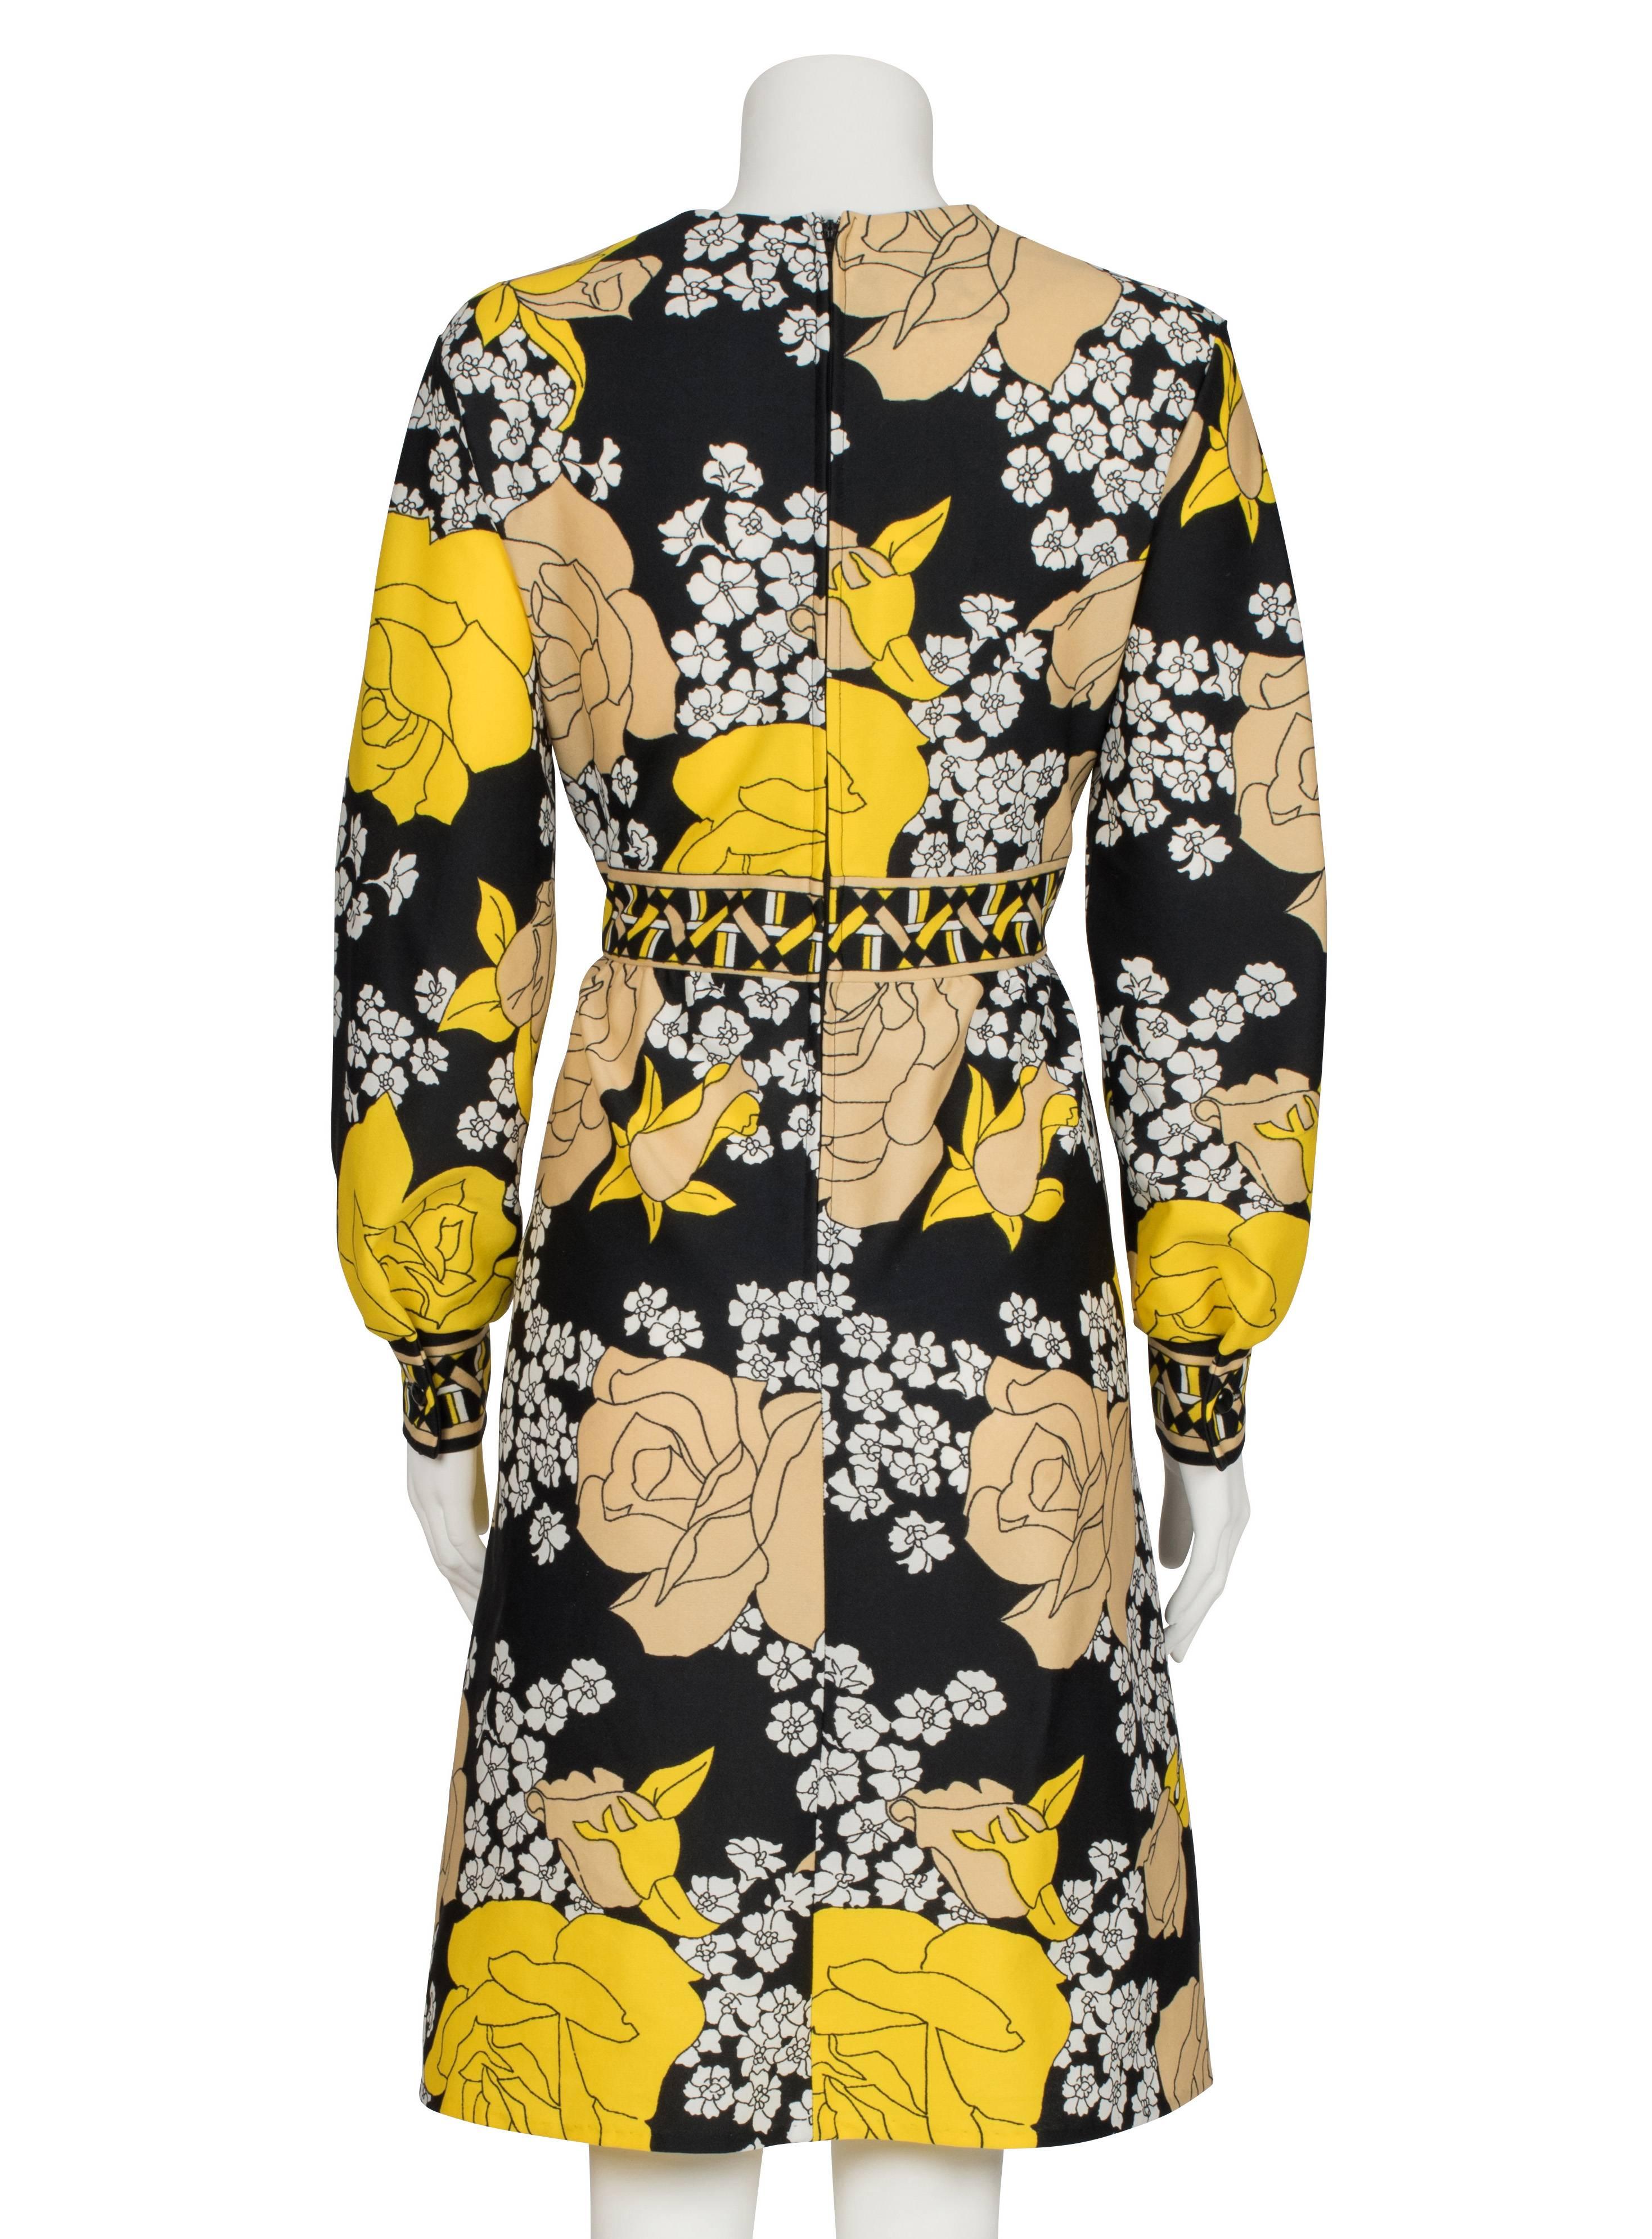 Women's 1970's Yellow & Black Floral Dress with Geometric Frieze For Sale